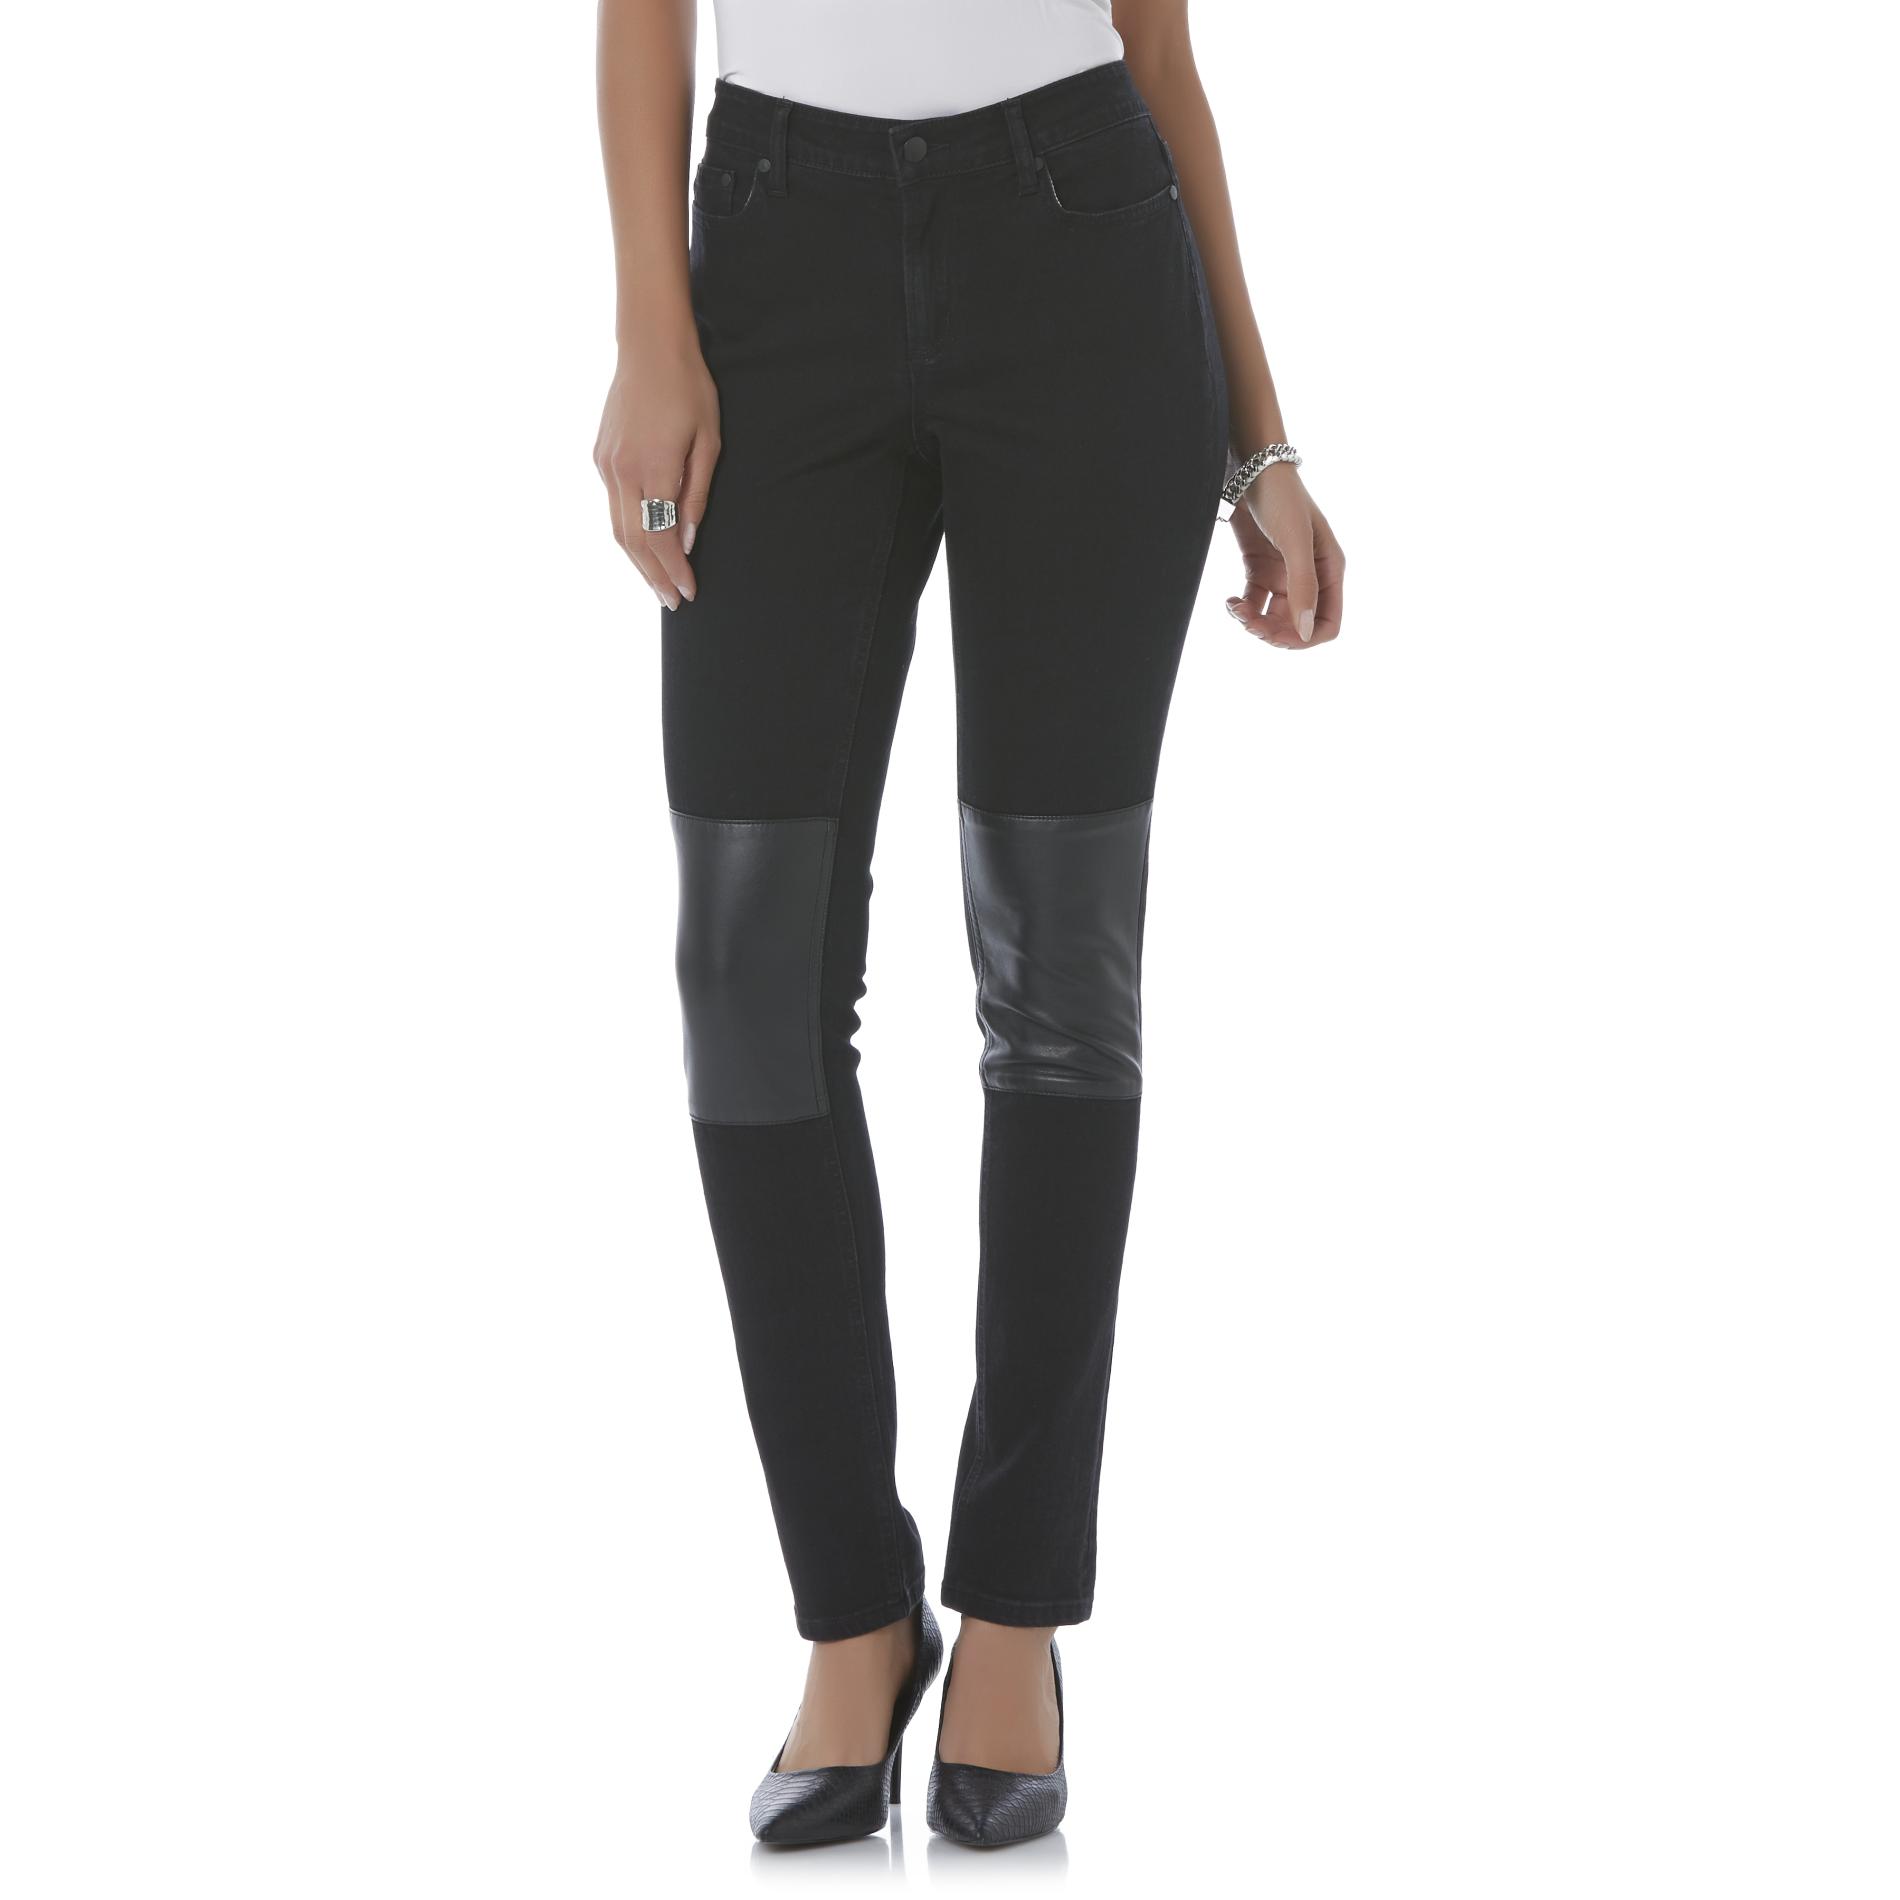 Metaphor Women's Synthetic Leather Patch Jeans